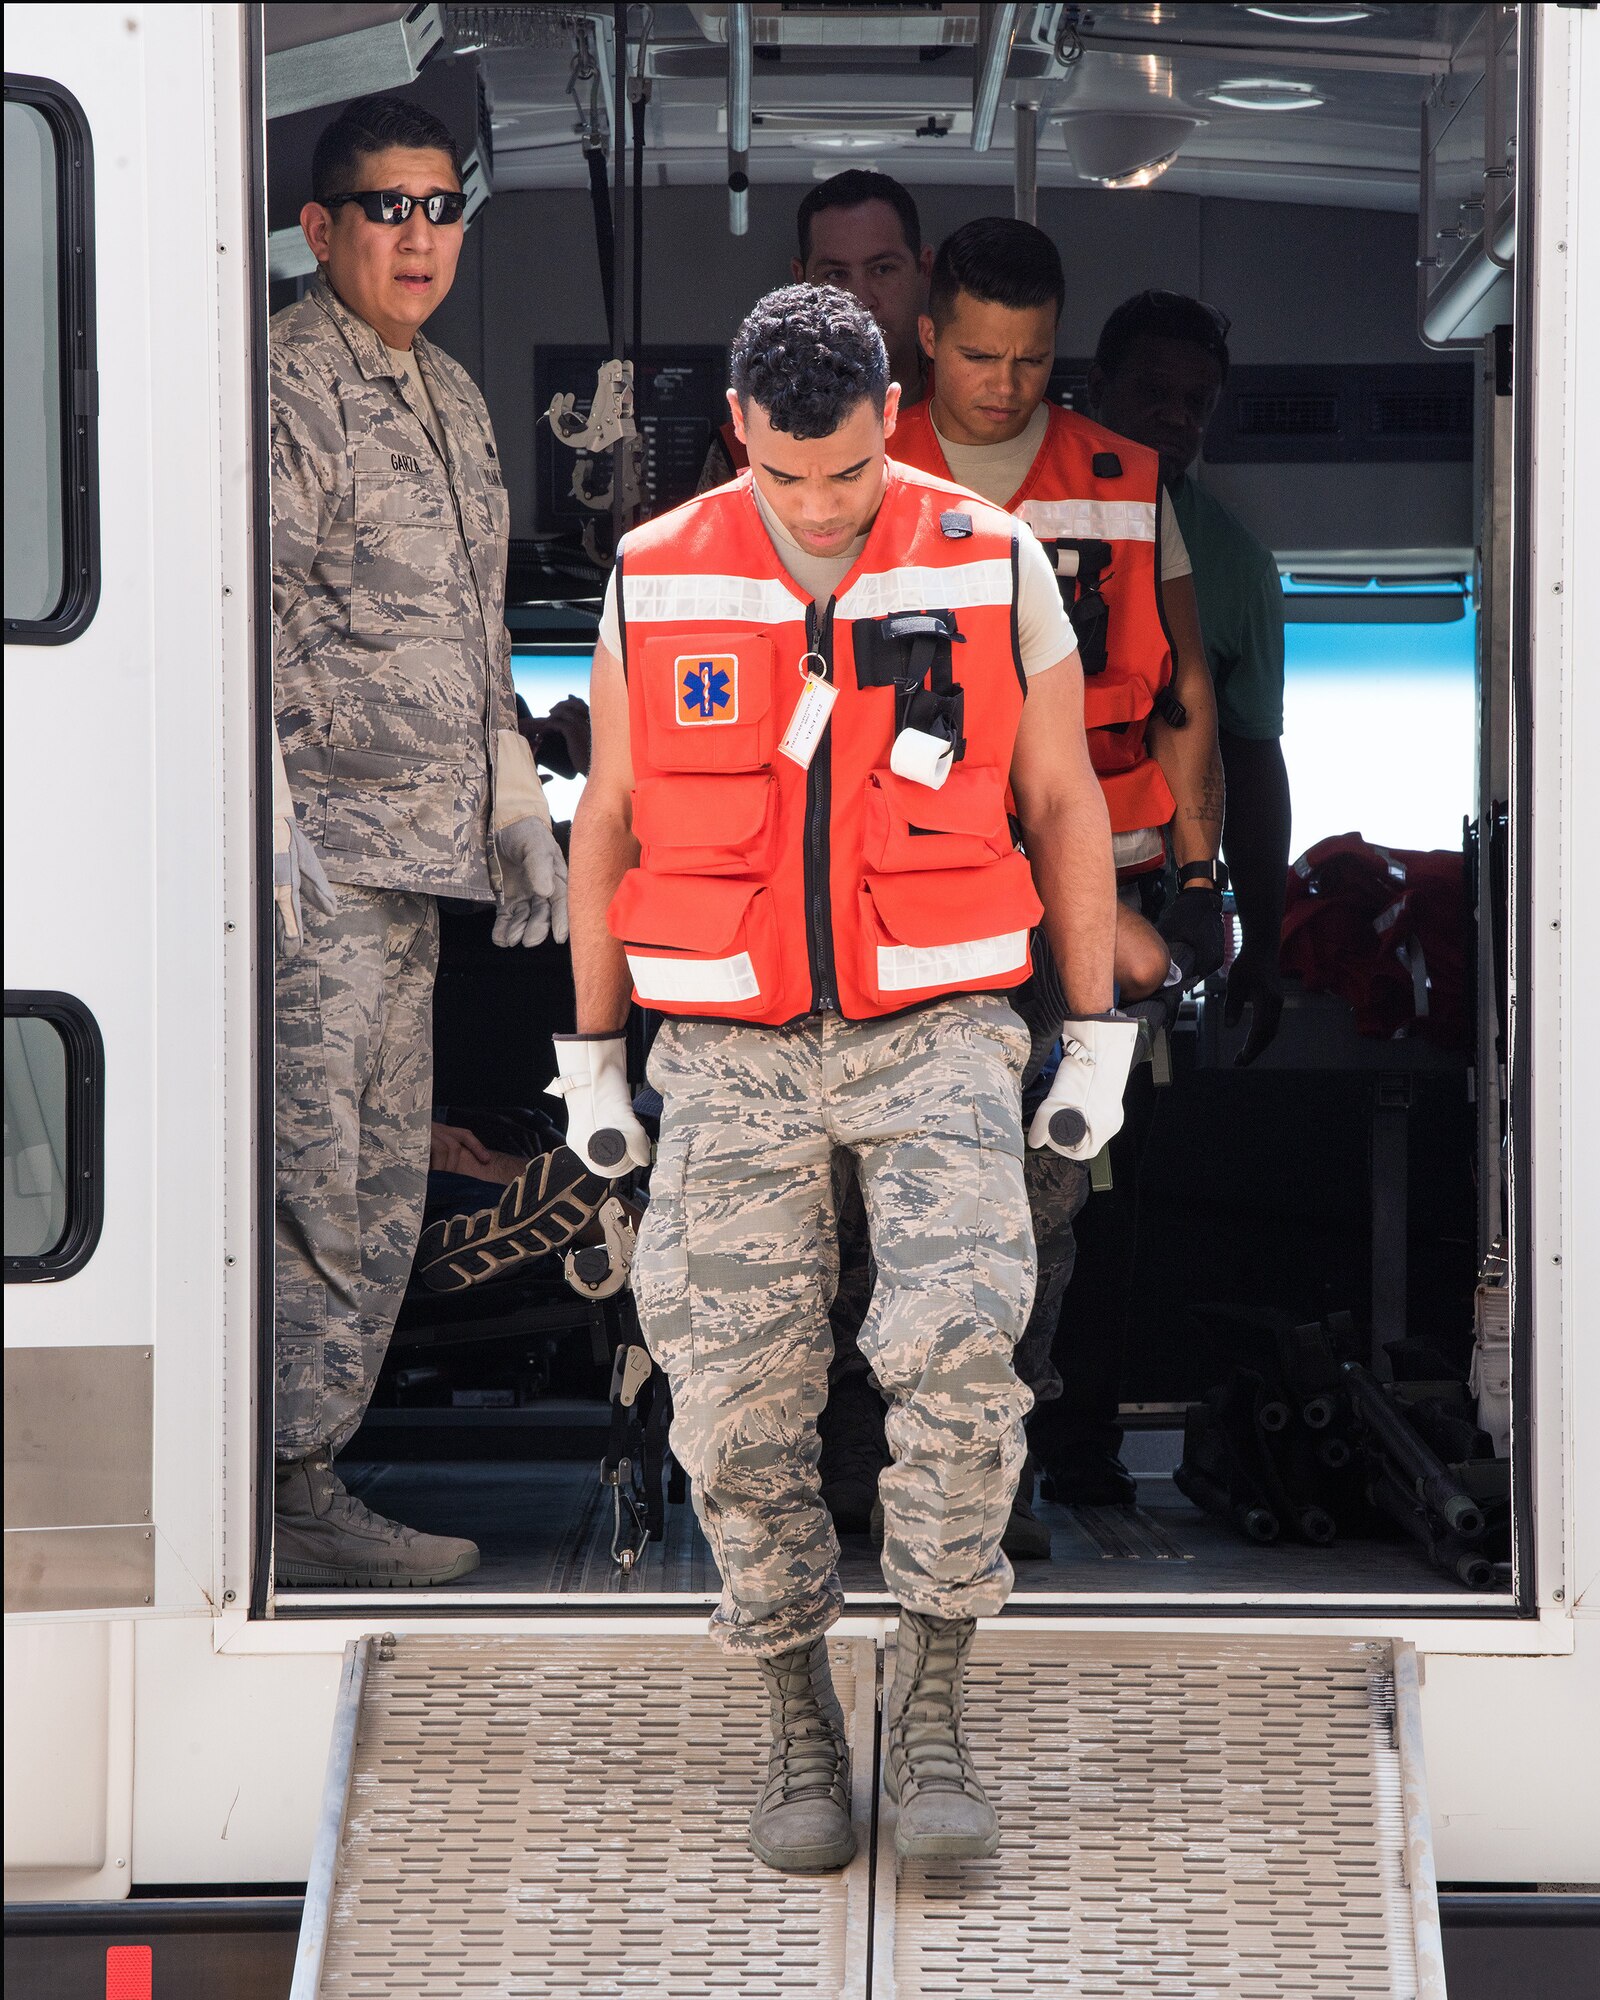 U.S. Airmen from the 60th Medical Group, Travis Air Force Base, California, transport a simulated patient during Exercise Ultimate Caduceus 2018 at Mather Airport, Sacramento, California, Aug. 23, 2018. Ultimate Caduceus 2018 is an annual patient movement exercise designed to test the ability of U.S. Transportation Command to provide medical evacuation. (U.S. Air Force photo by Louis Briscese)